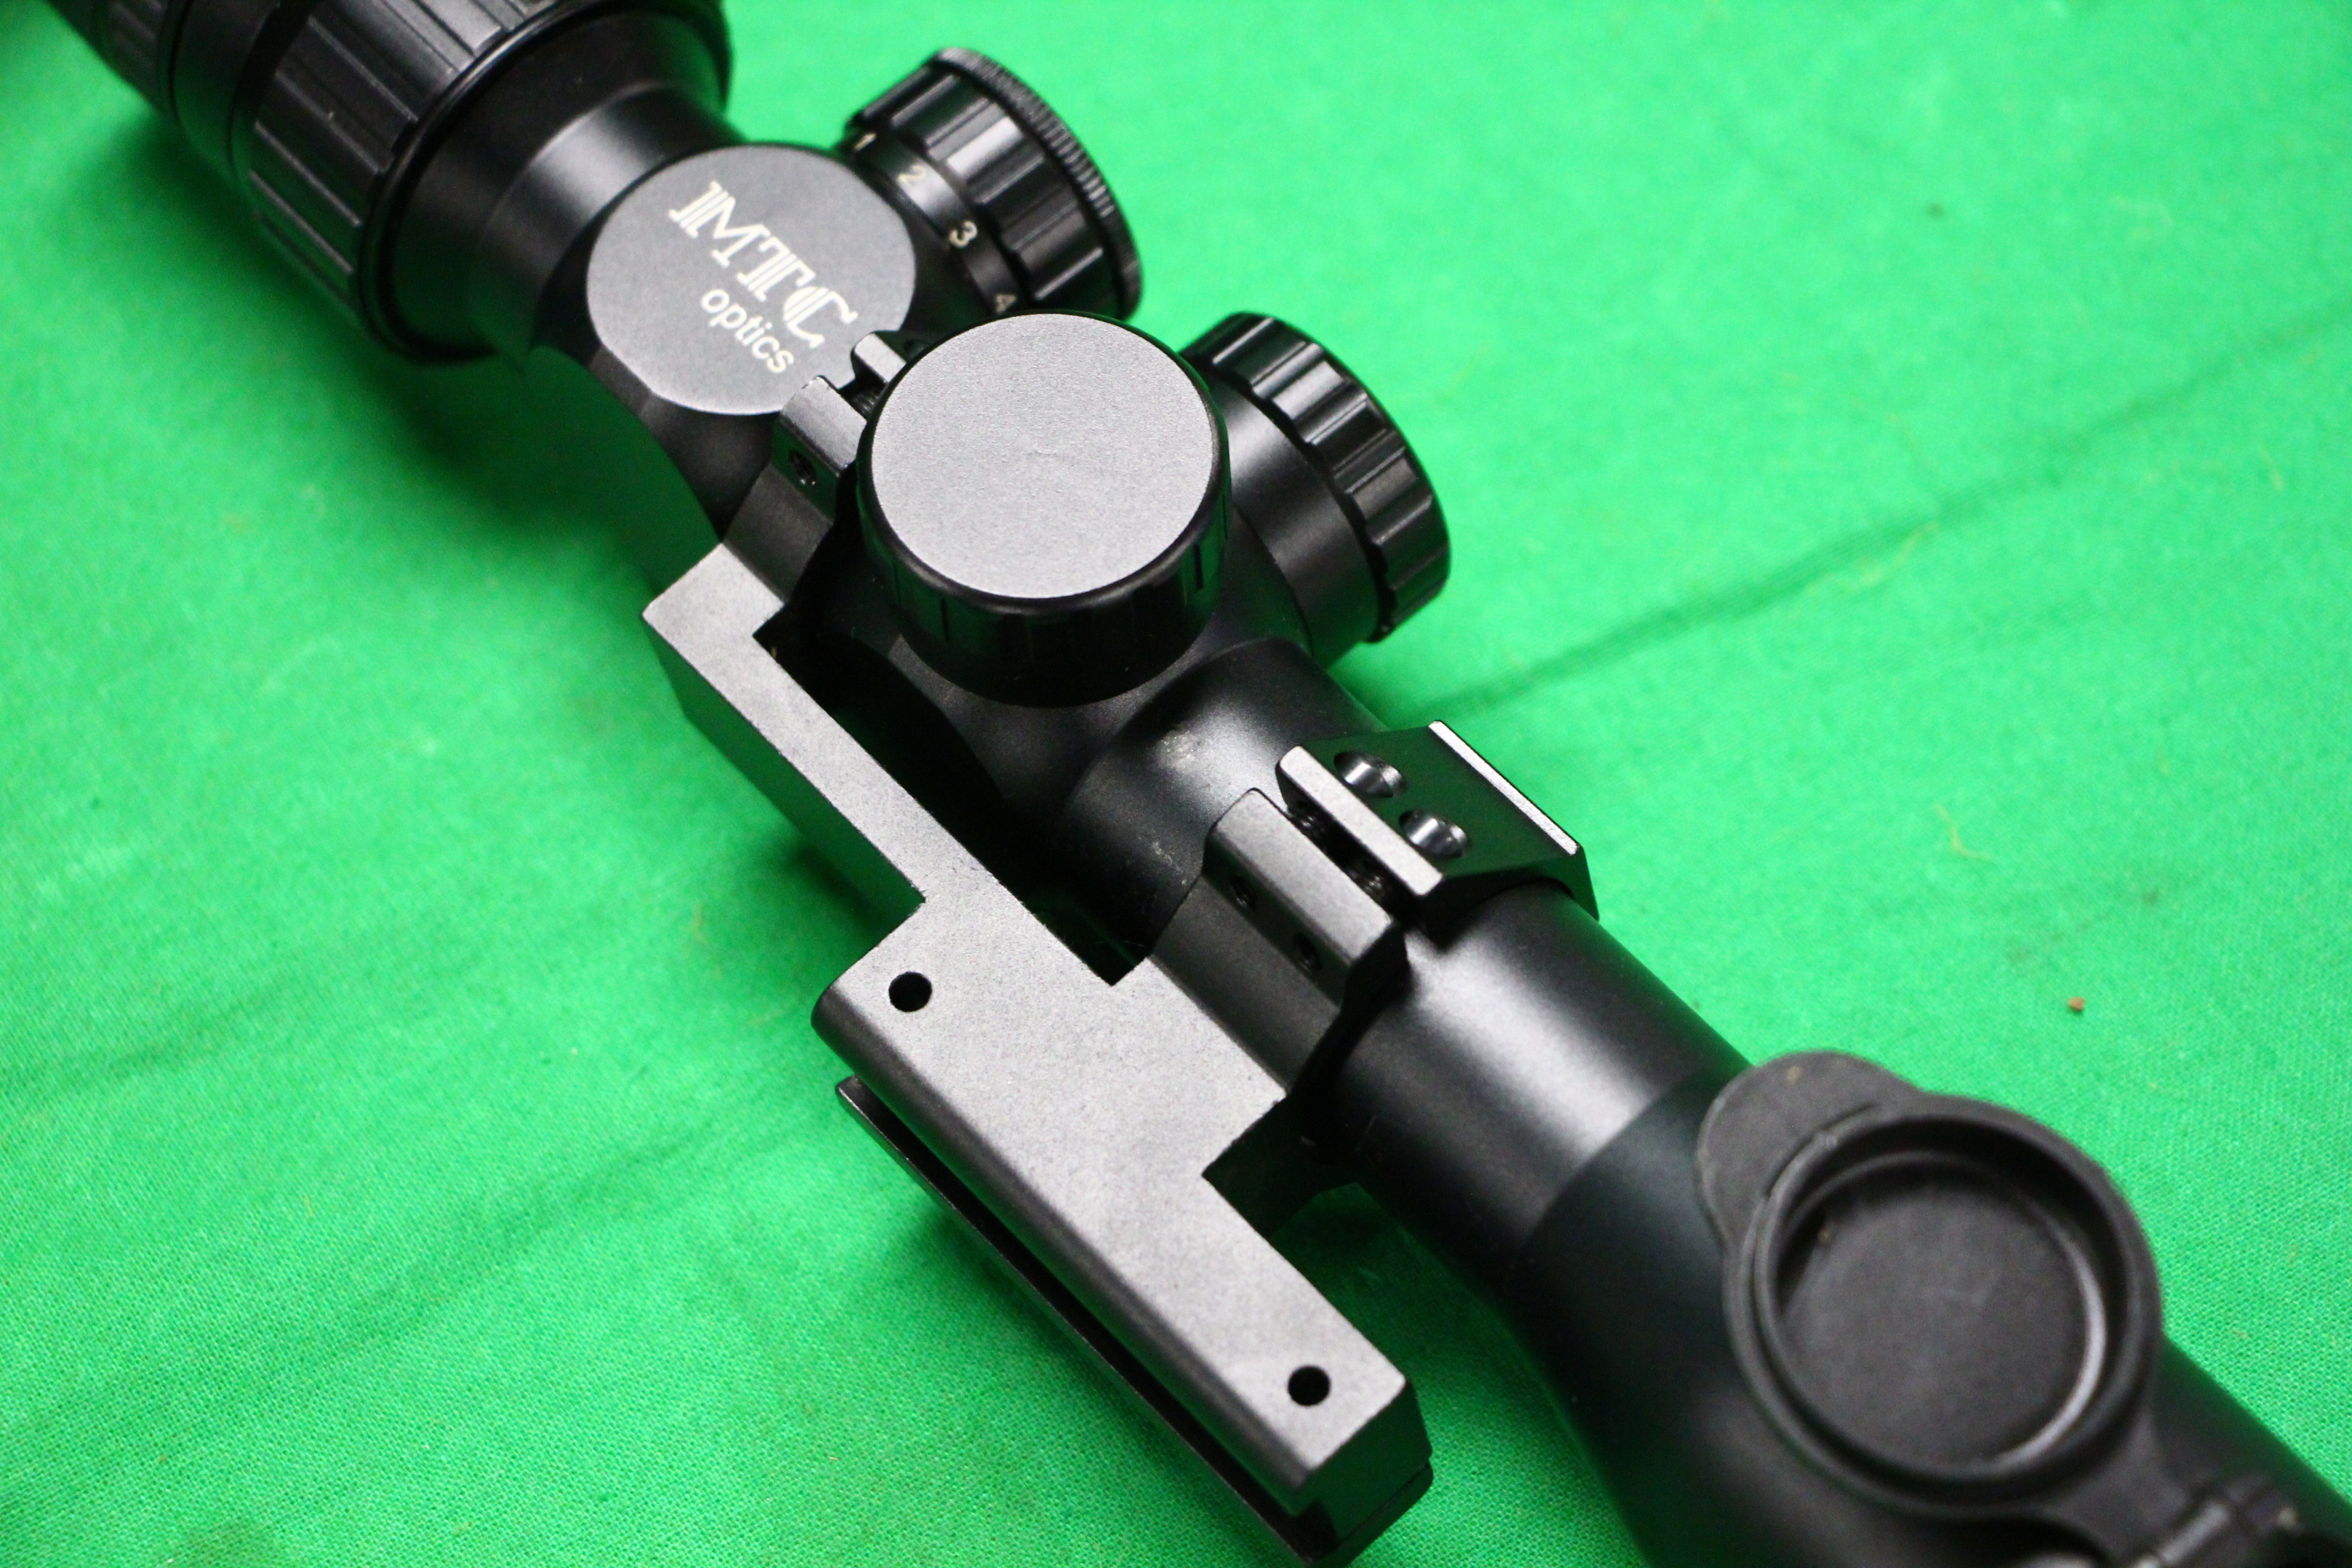 A BOXED MTC OPTICS VIPER X SERIES CONNECT 3-12 X32 RIFLE SCOPE WITH MOUNTS - Image 8 of 10